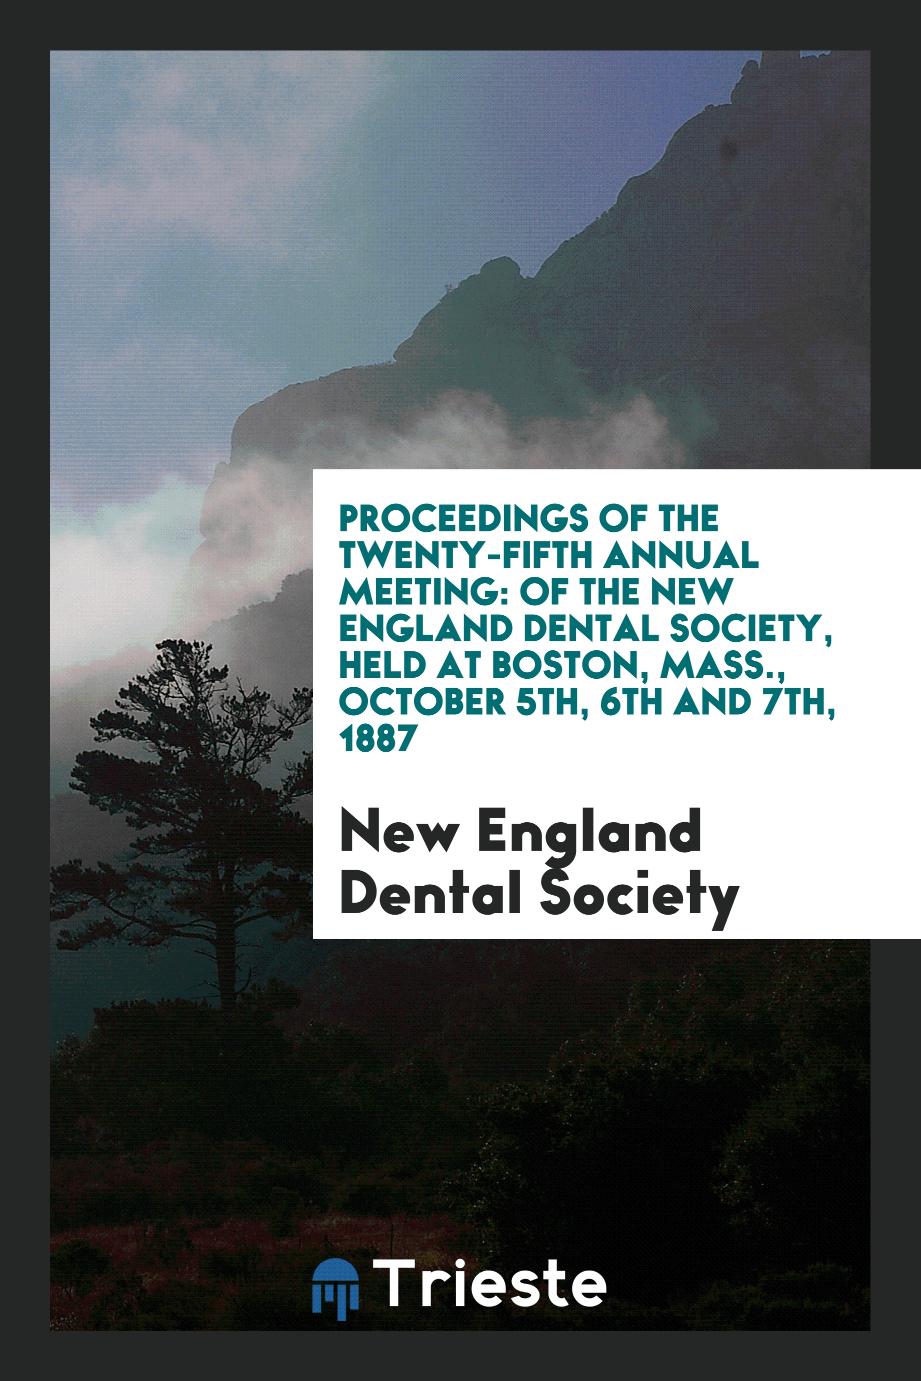 Proceedings of the Twenty-Fifth Annual Meeting: Of the New England Dental Society, Held at Boston, Mass., October 5th, 6th and 7th, 1887